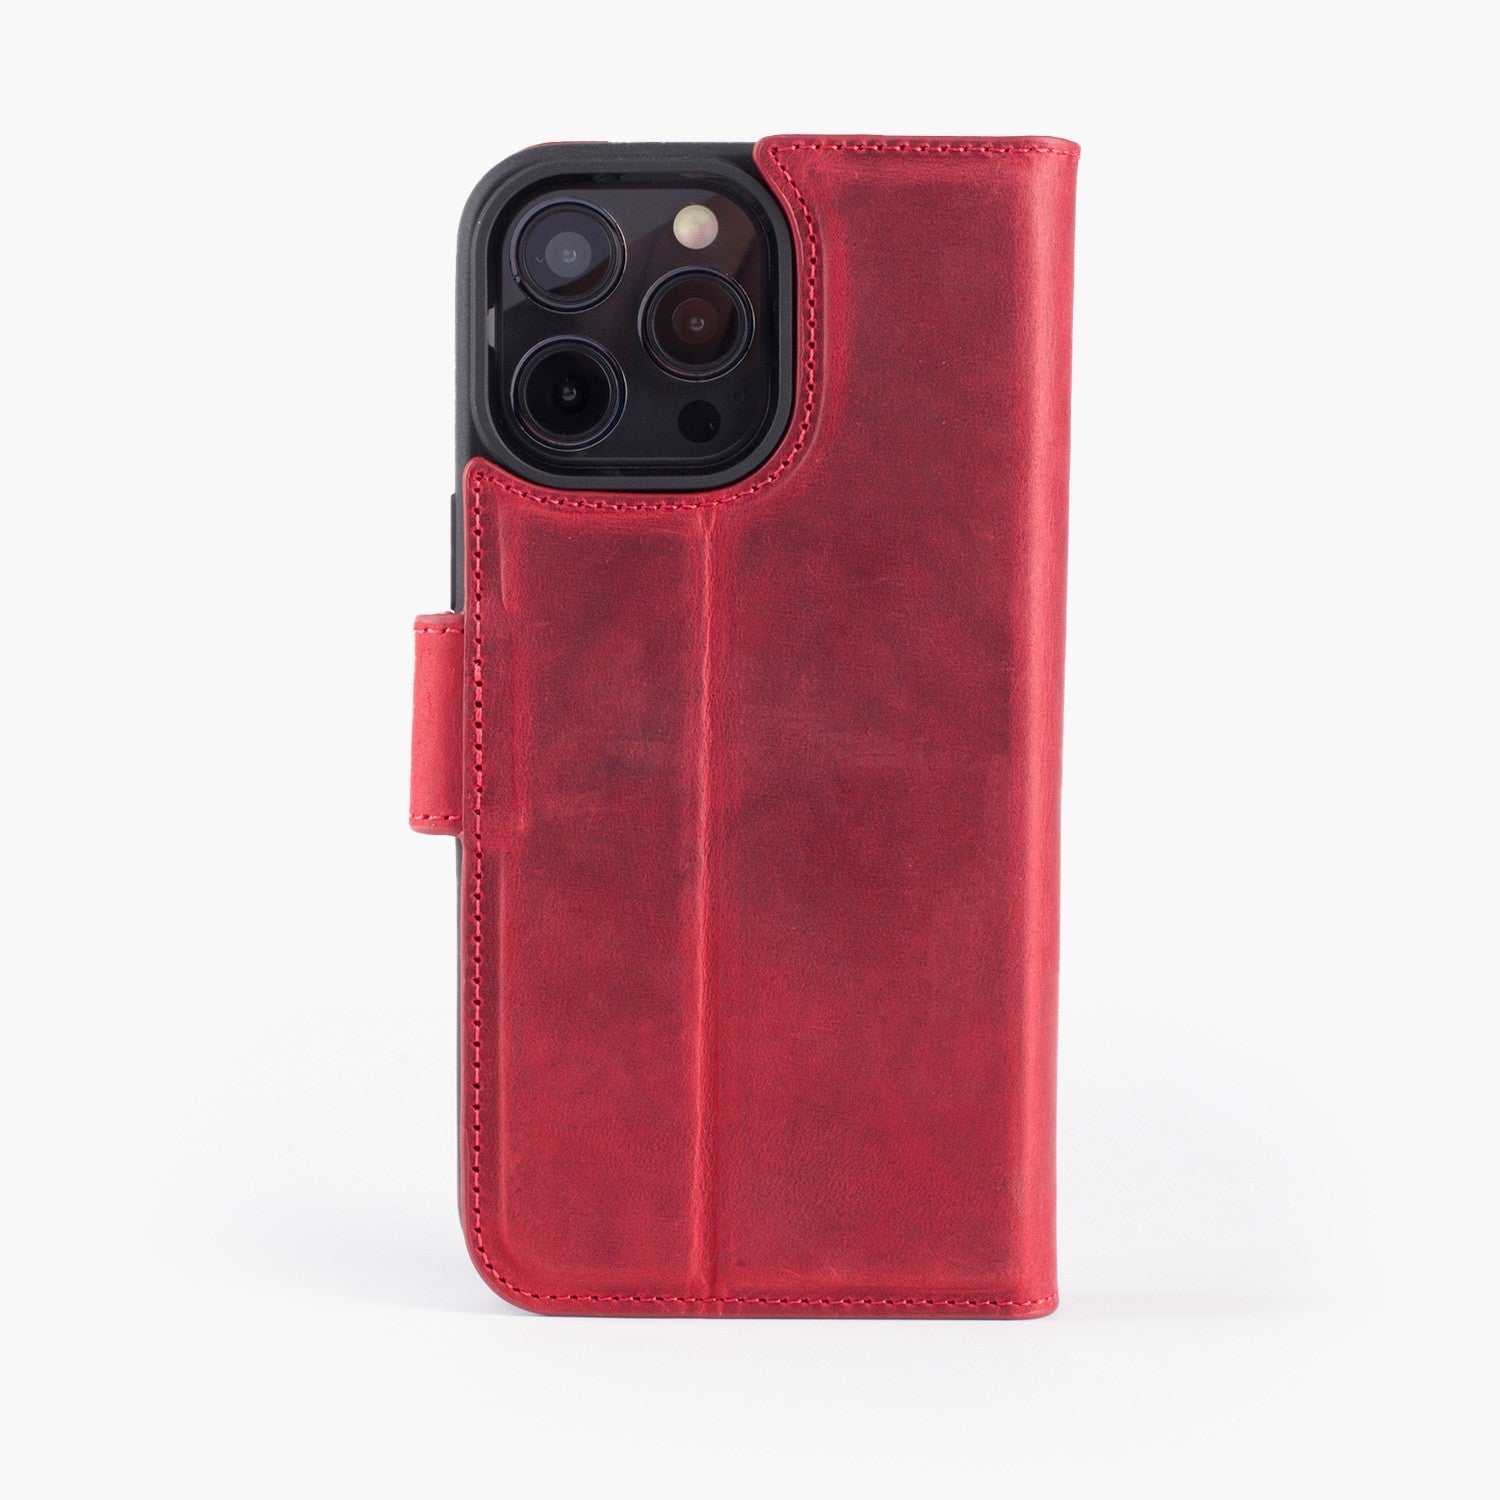 Wachikopa leather Magic Book Case 2 in 1 for iPhone 13 Pro Max Red